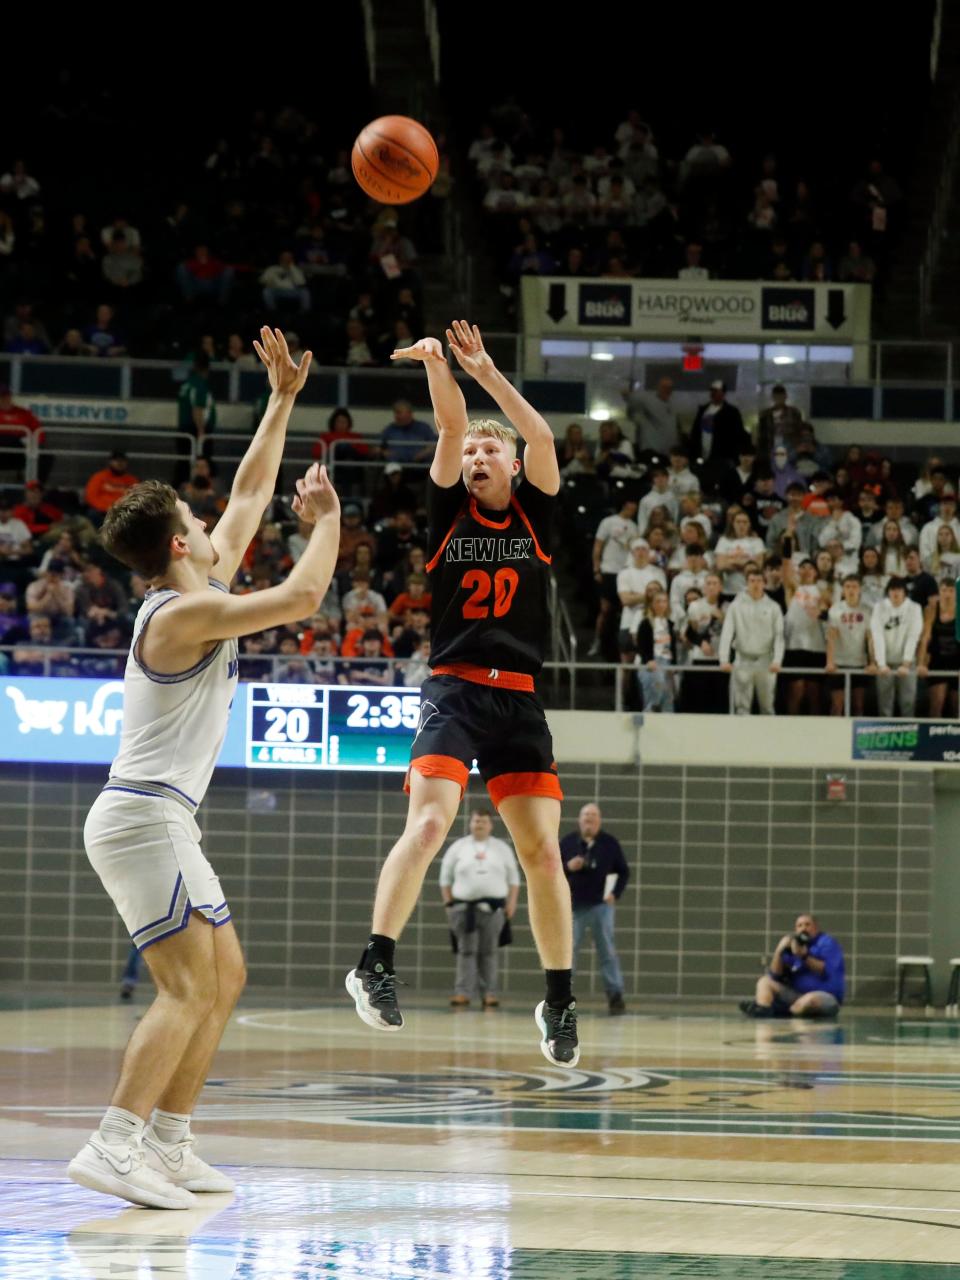 Bentley Hanson shoots a 3-pointer during New Lexington's 54-46 overtime loss to Vincent Warren in a Division II district final on Saturday at the Ohio Convocation Center in Athens. New Lex wrapped up a 21- season that ended one win shy of its first district title in 26 years.